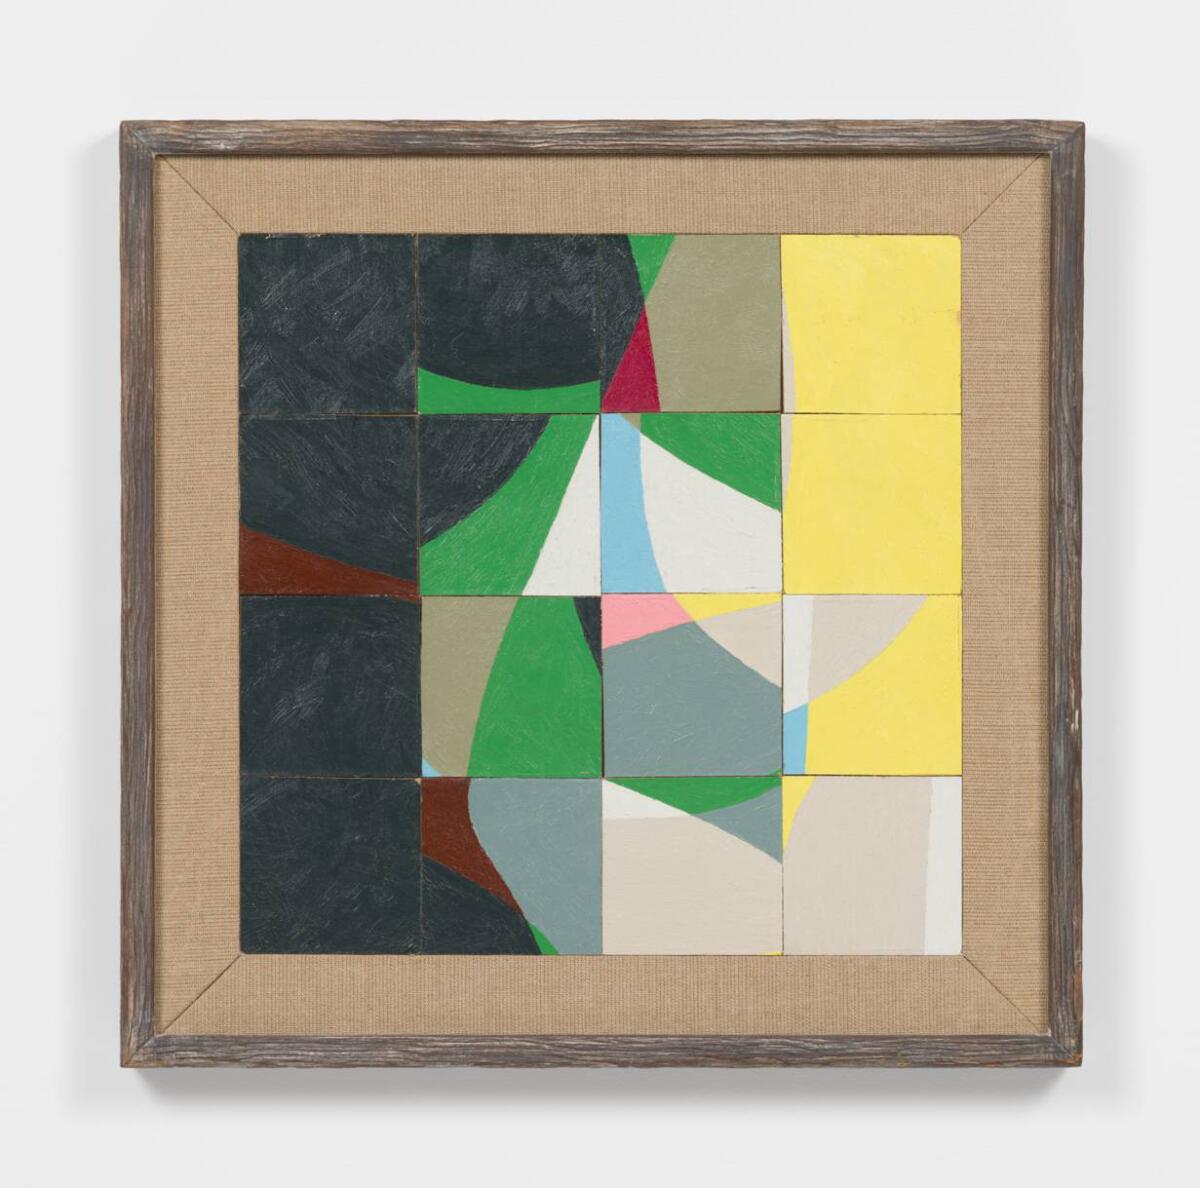 Frederick Hammersley's "Cut Up," 1964, oil on chipboard panel in artist-made frame, 21.25 inches by x 21.25 inches (L.A. Louver)